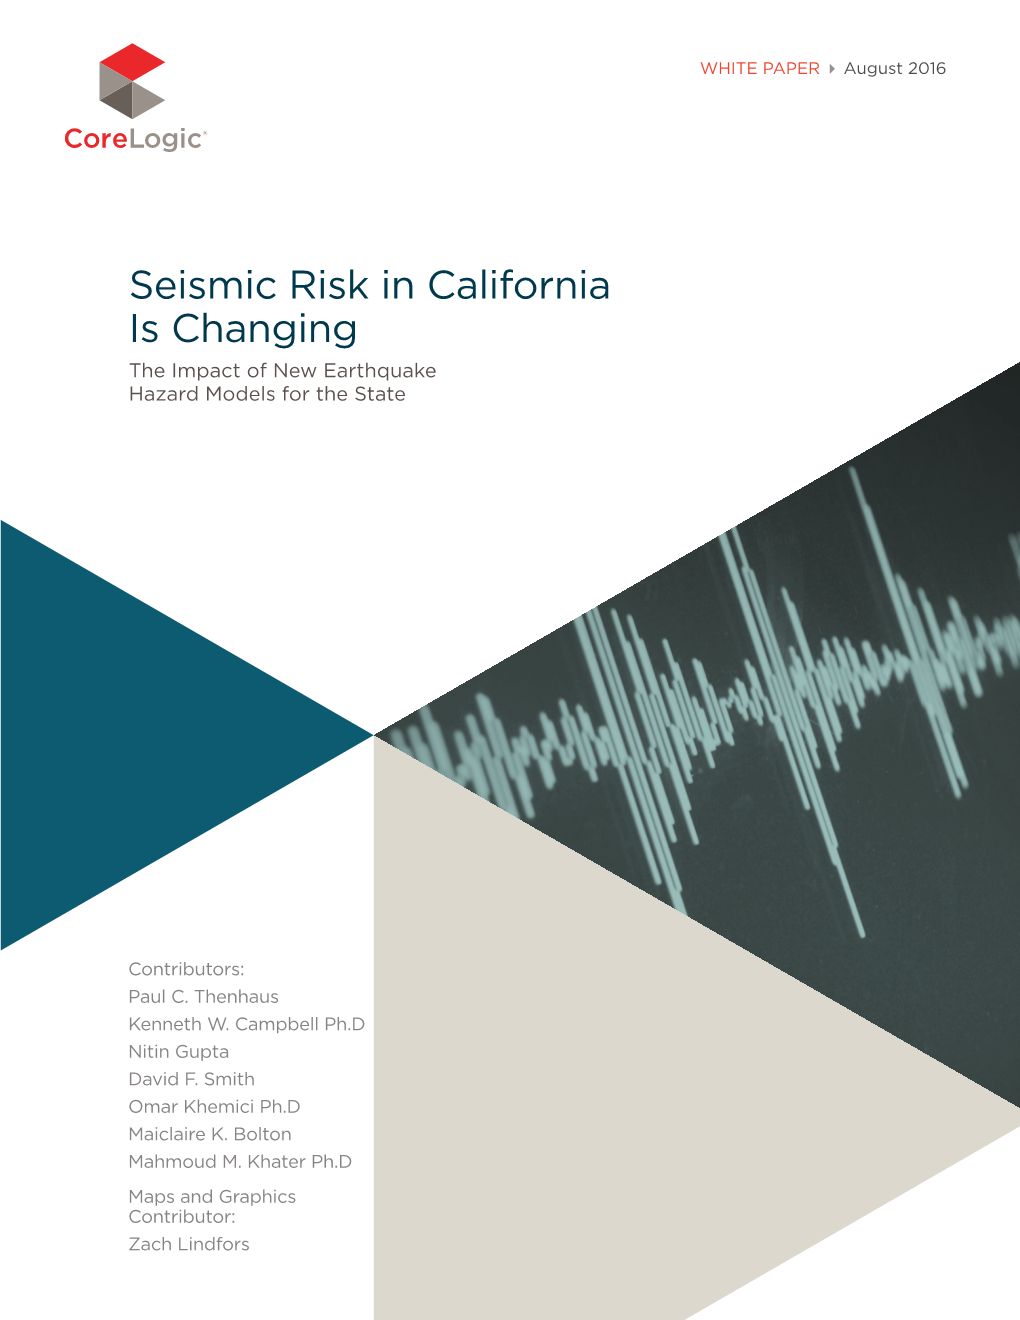 Seismic Risk in California Is Changing the Impact of New Earthquake Hazard Models for the State